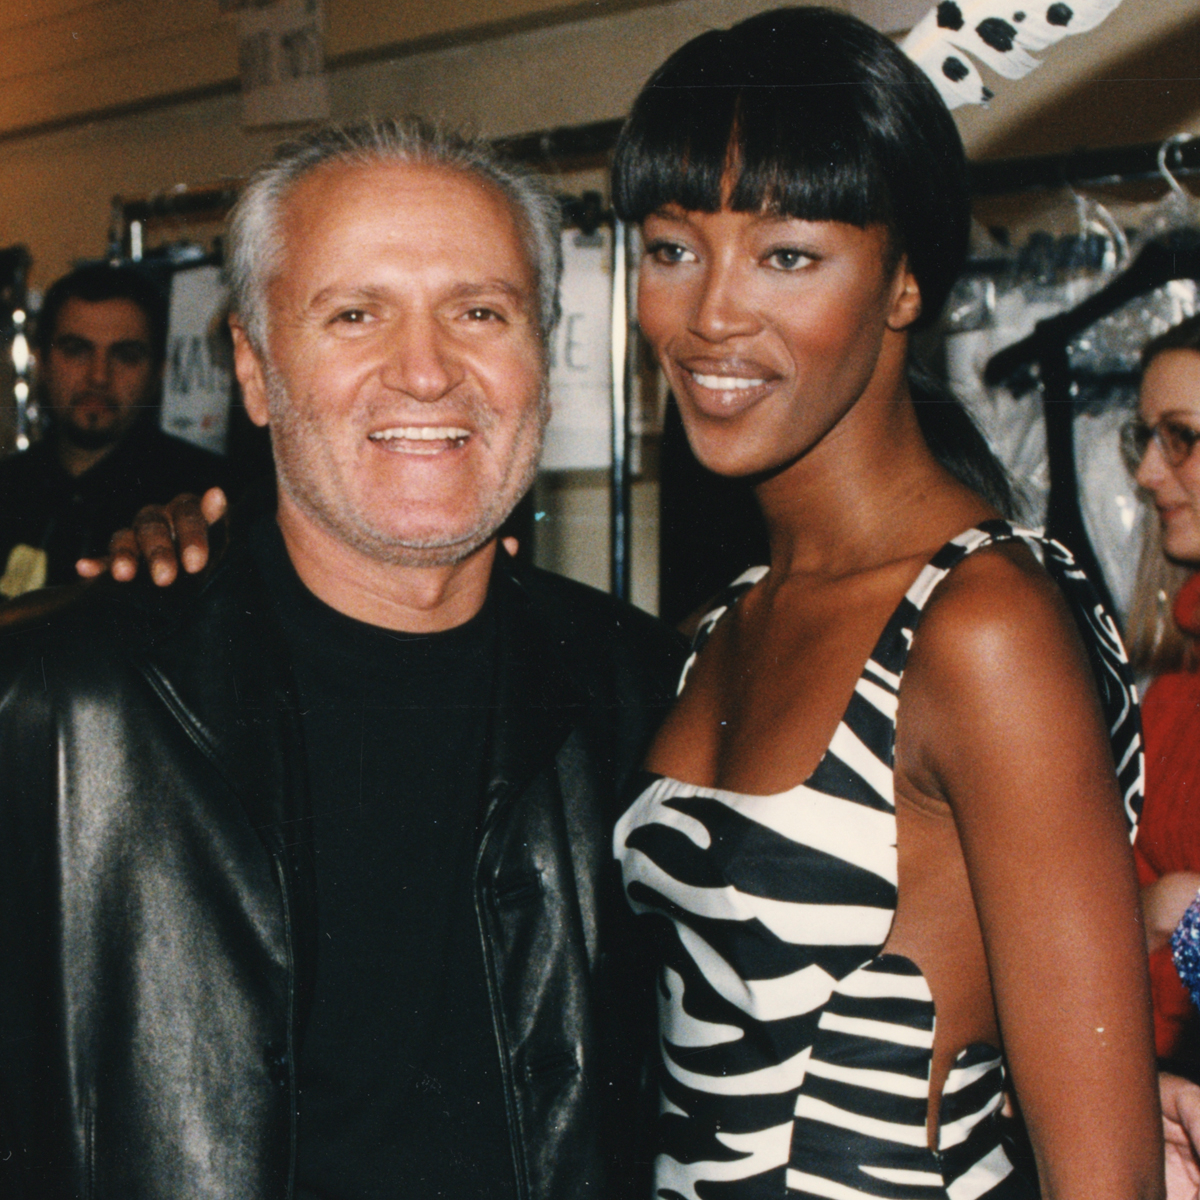 Naomi Campbell Shares Rare Pic of Her Baby to Honor Gianni Versace